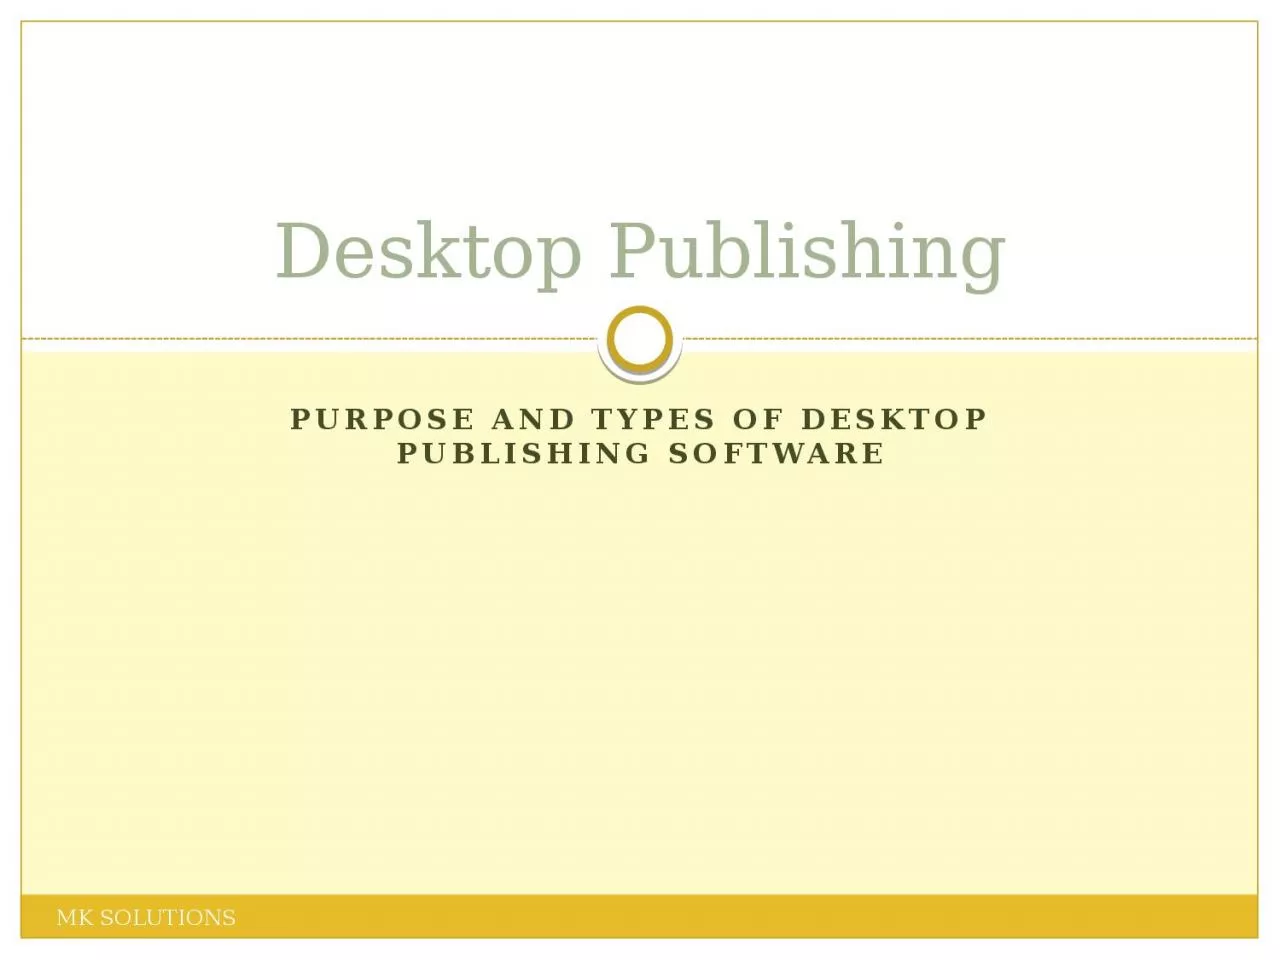 Purpose and Types of Desktop publishing software